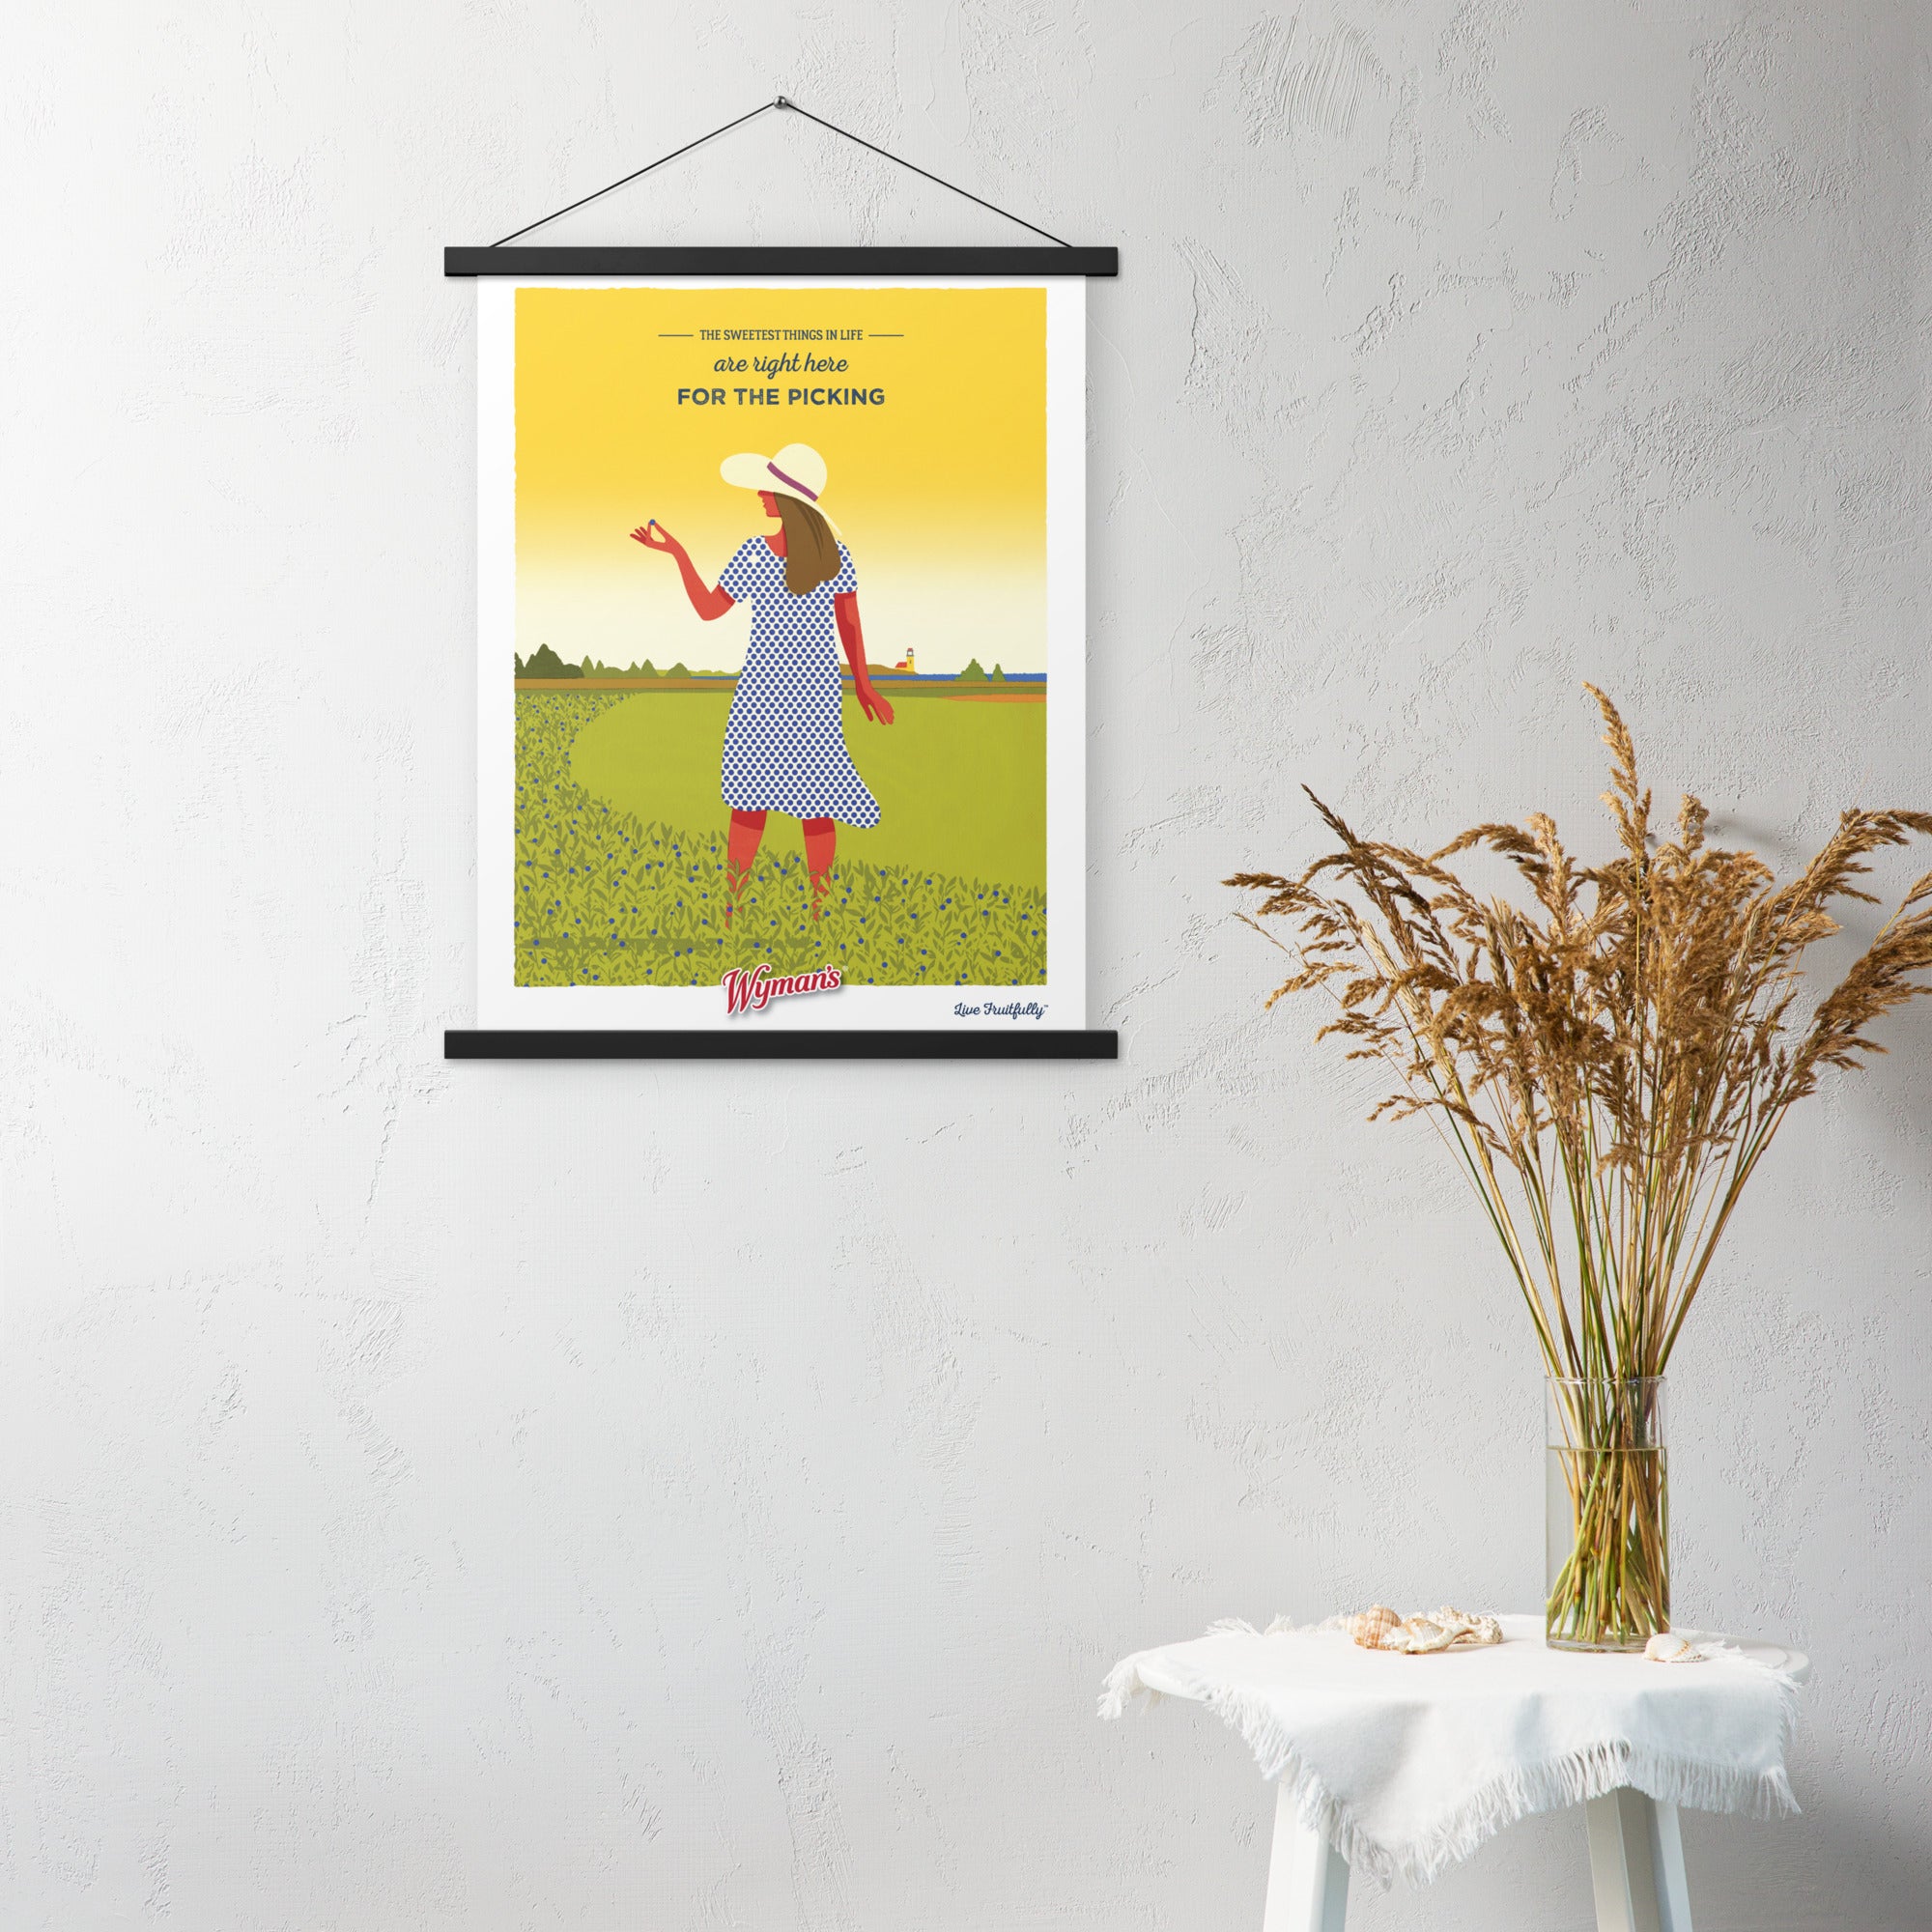 A Shop Wyman's "The Sweetest Things in Life are Right Here for the Picking" poster, featuring custom printing finishes.